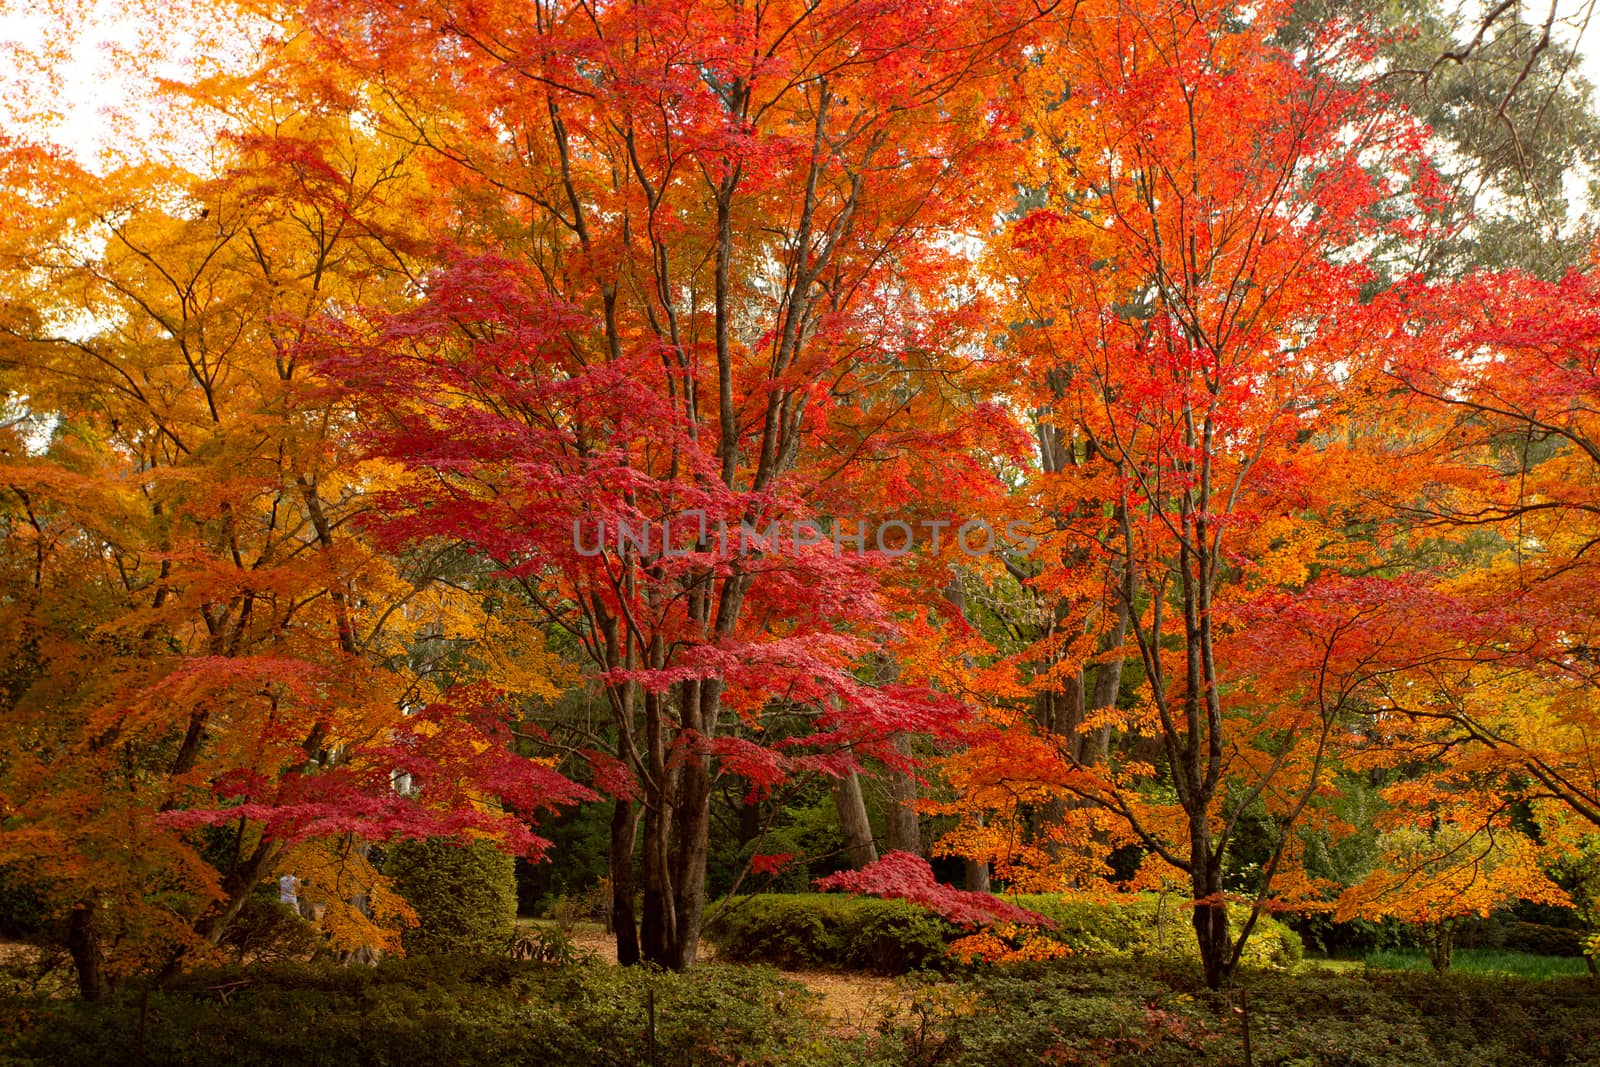 Deciduous trees ablaze in rich reds, oranges and golden yellows in the Autumn season